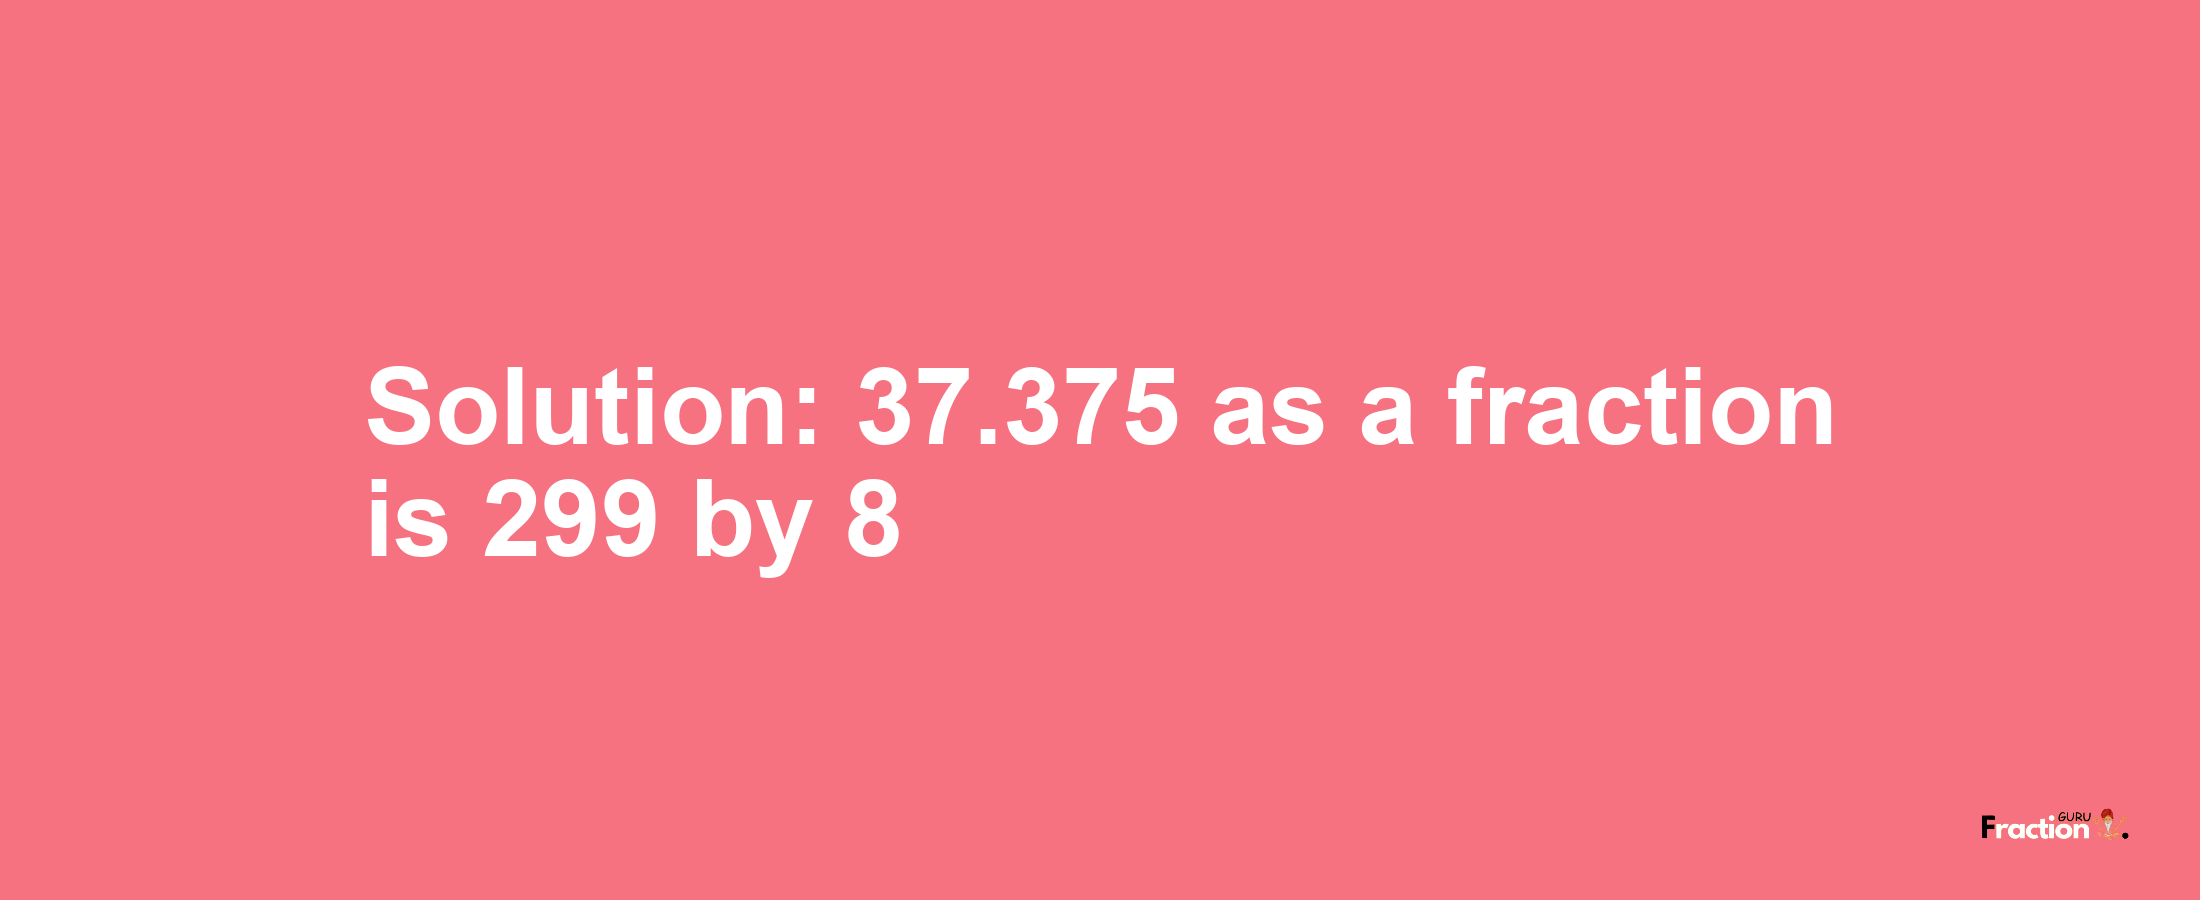 Solution:37.375 as a fraction is 299/8